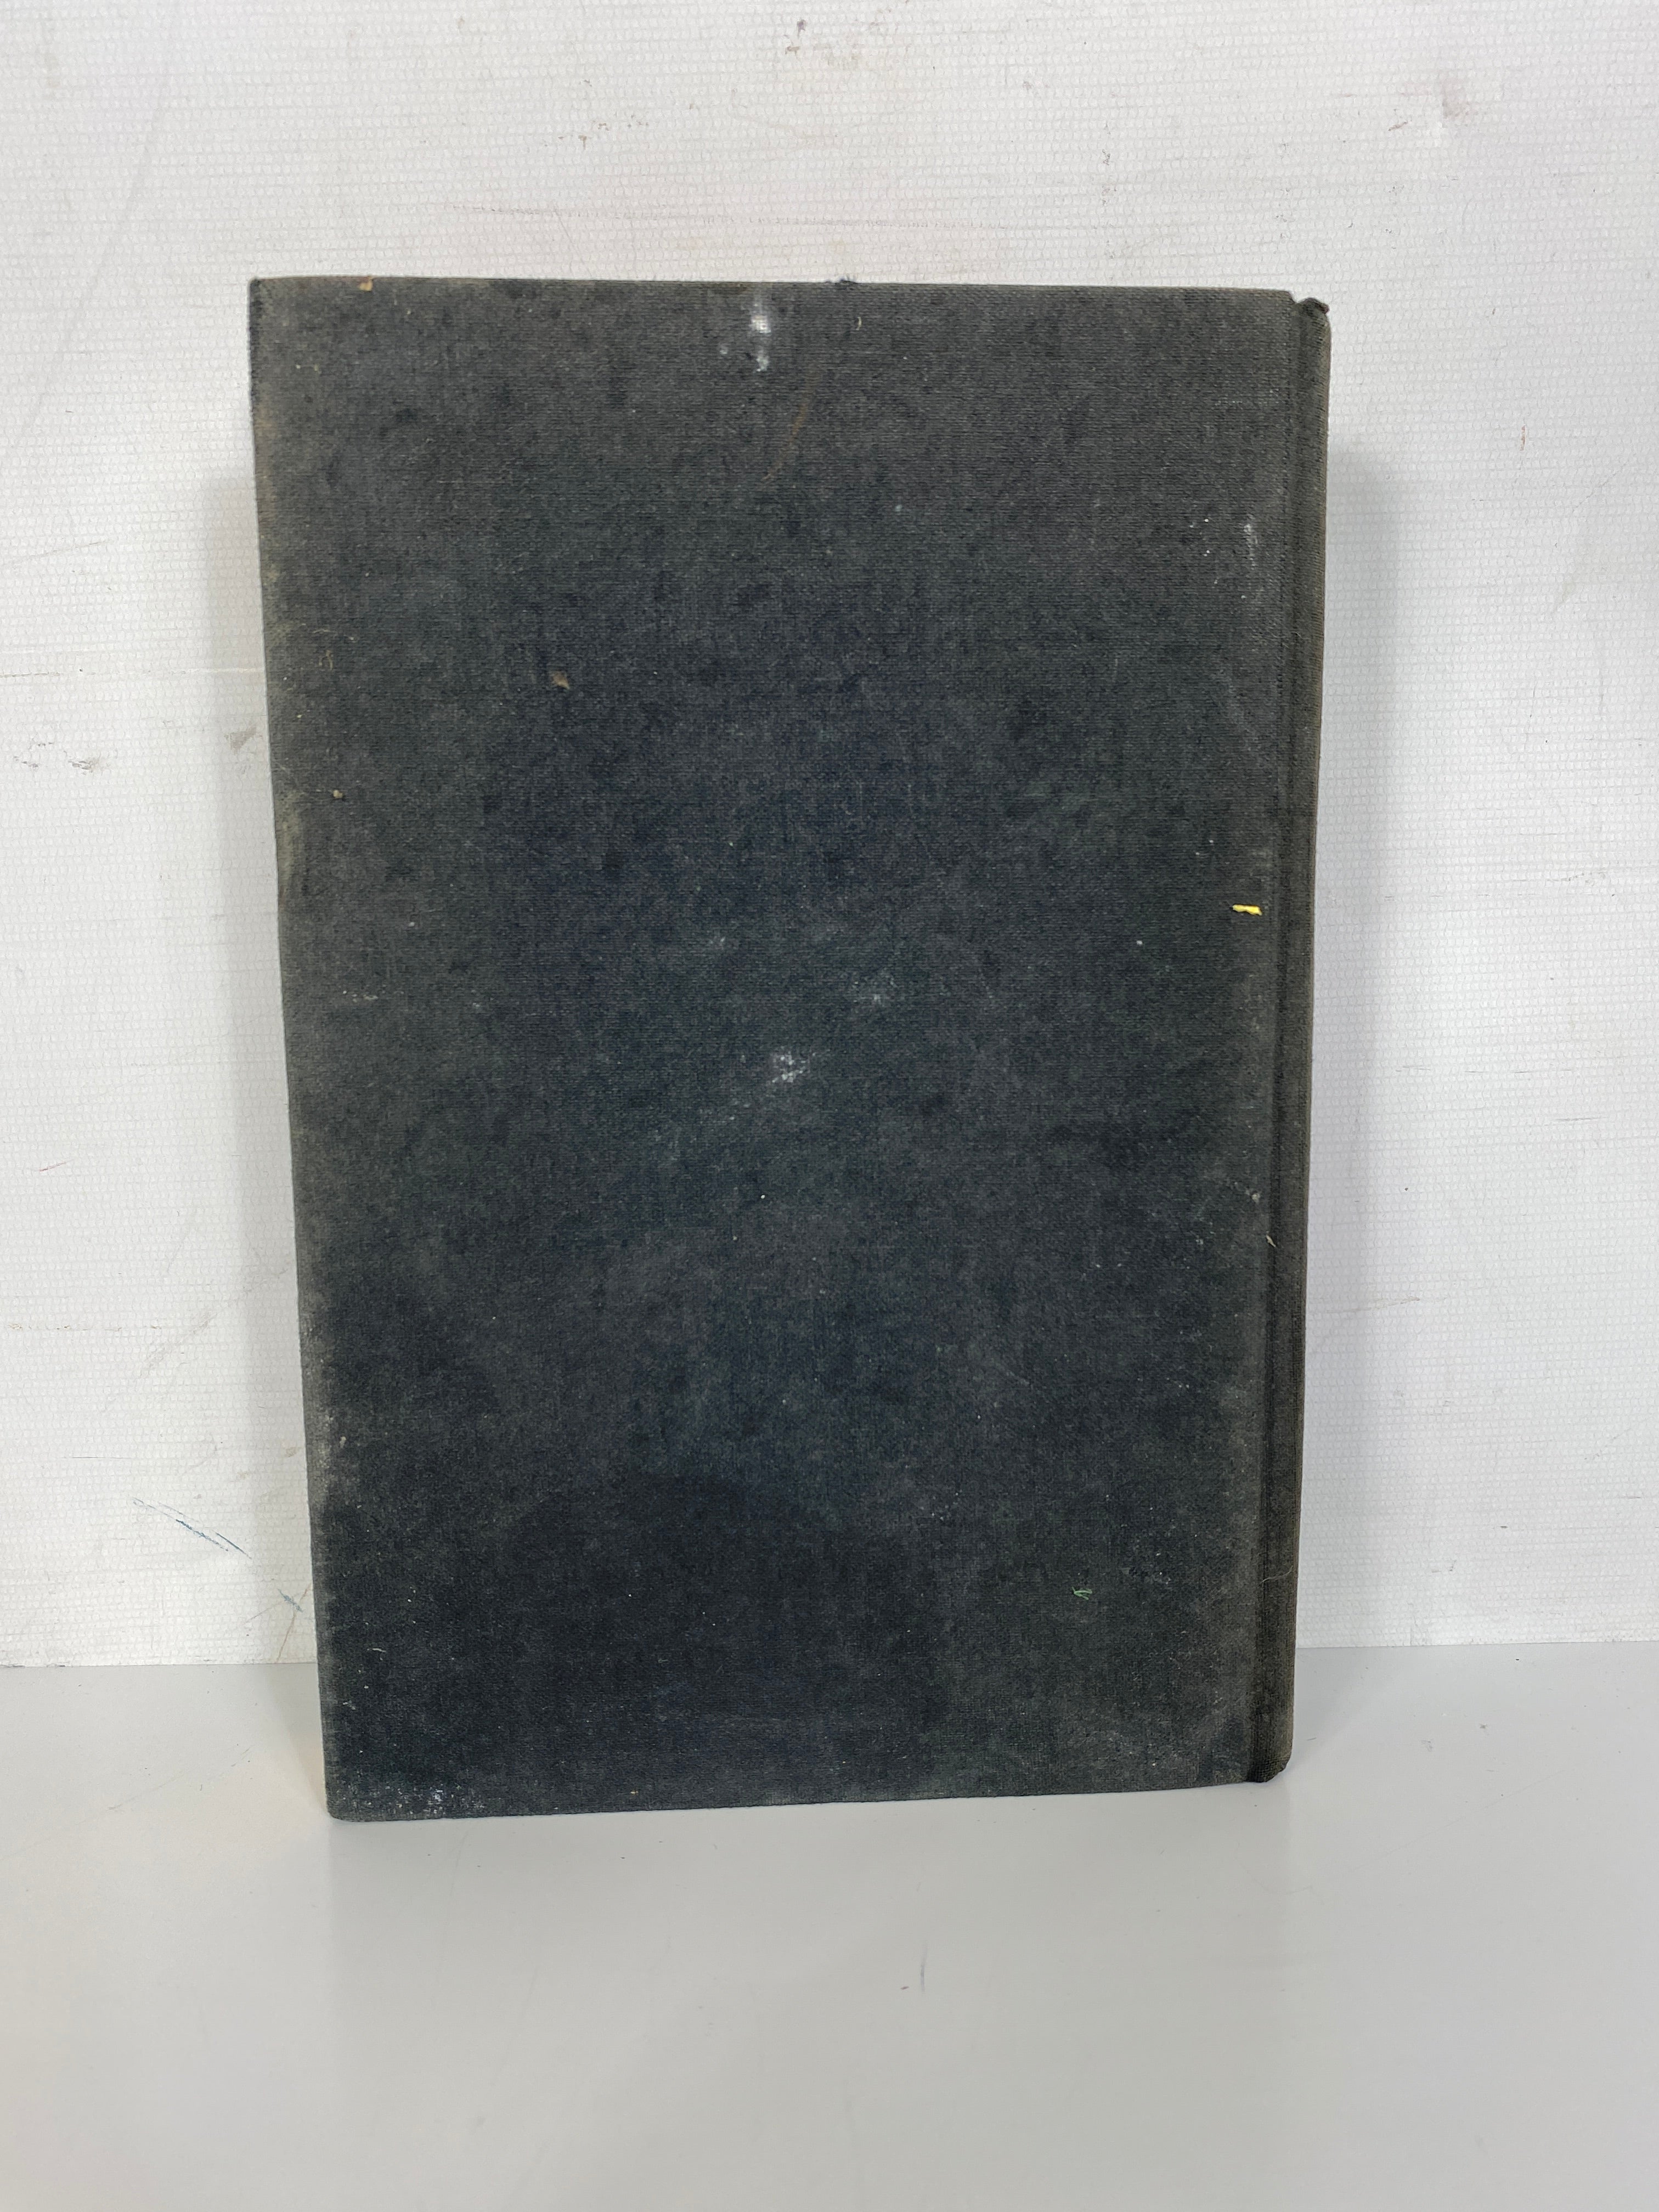 Masochism by Gilles Deleuze 1971 1st U.S. Edition 1st Printing HC